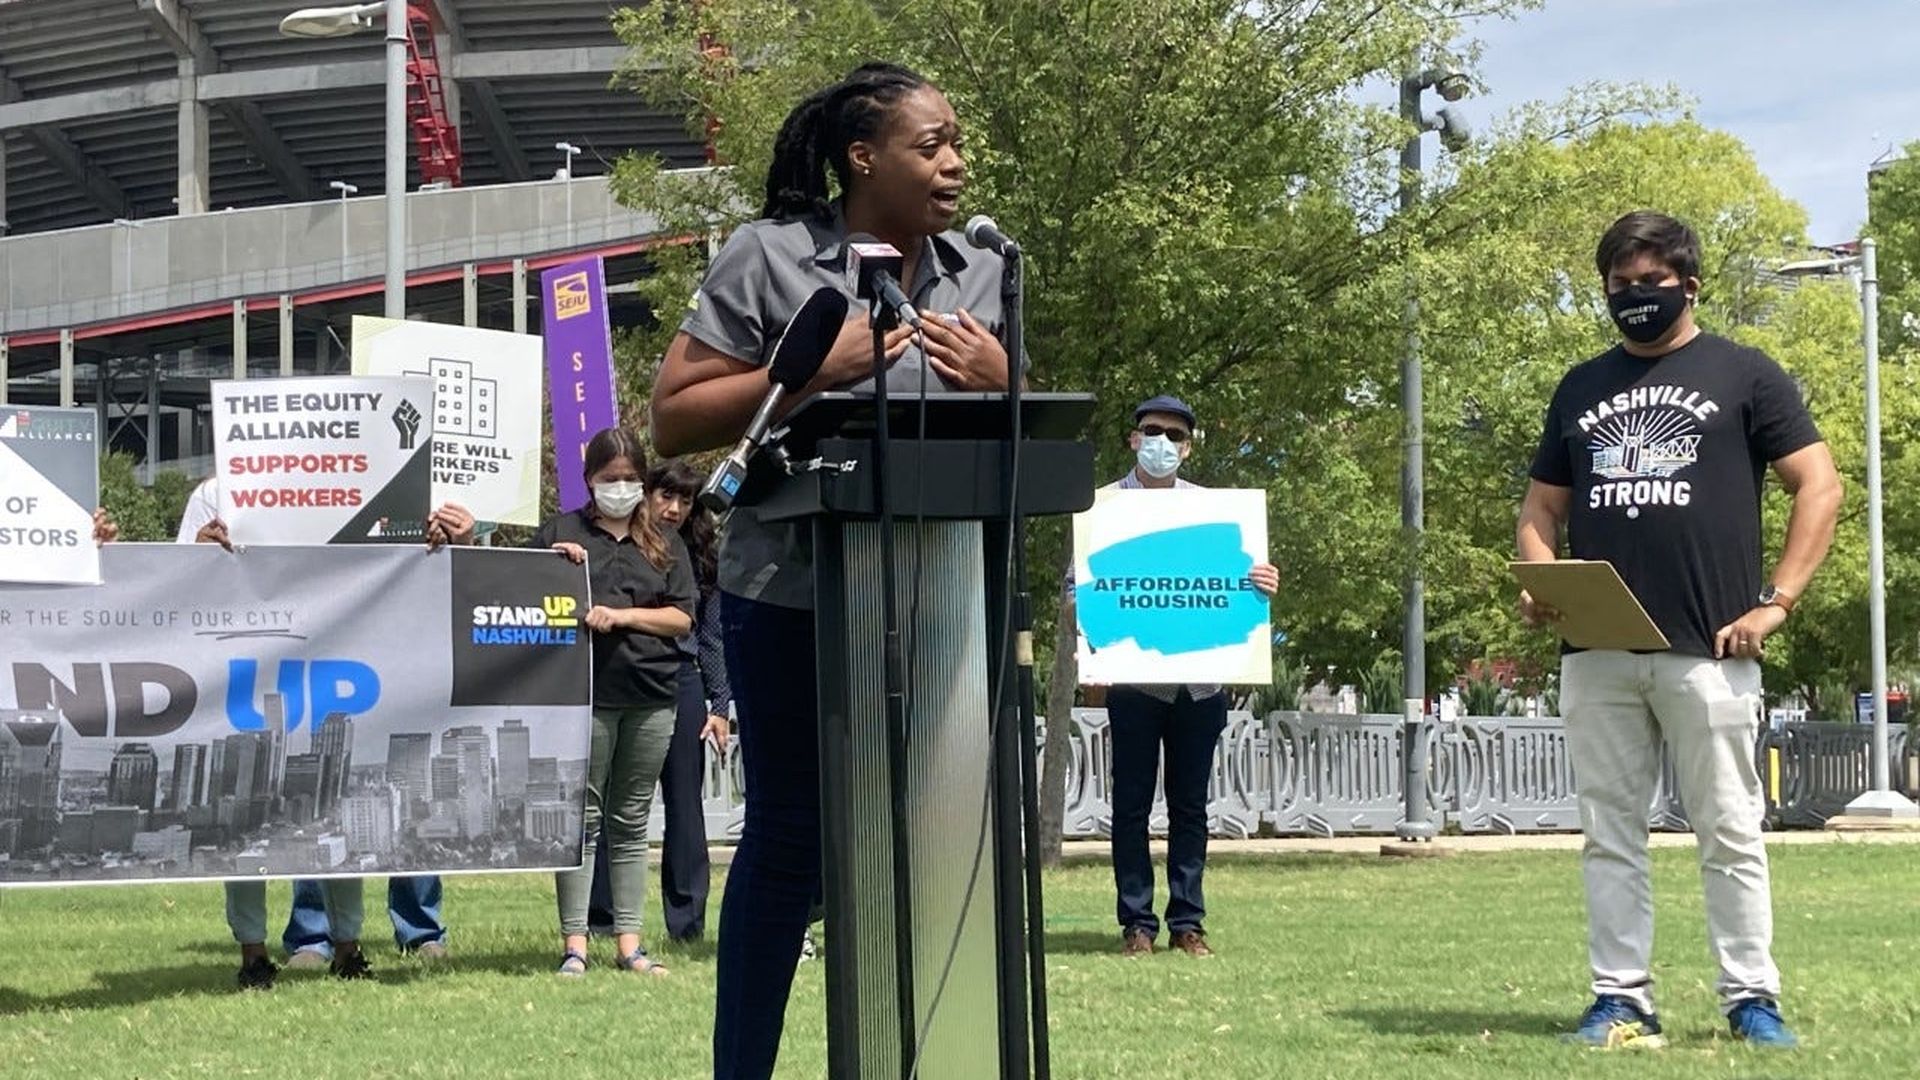 Odessa Kelly speaking at a podium on a grassy lawn